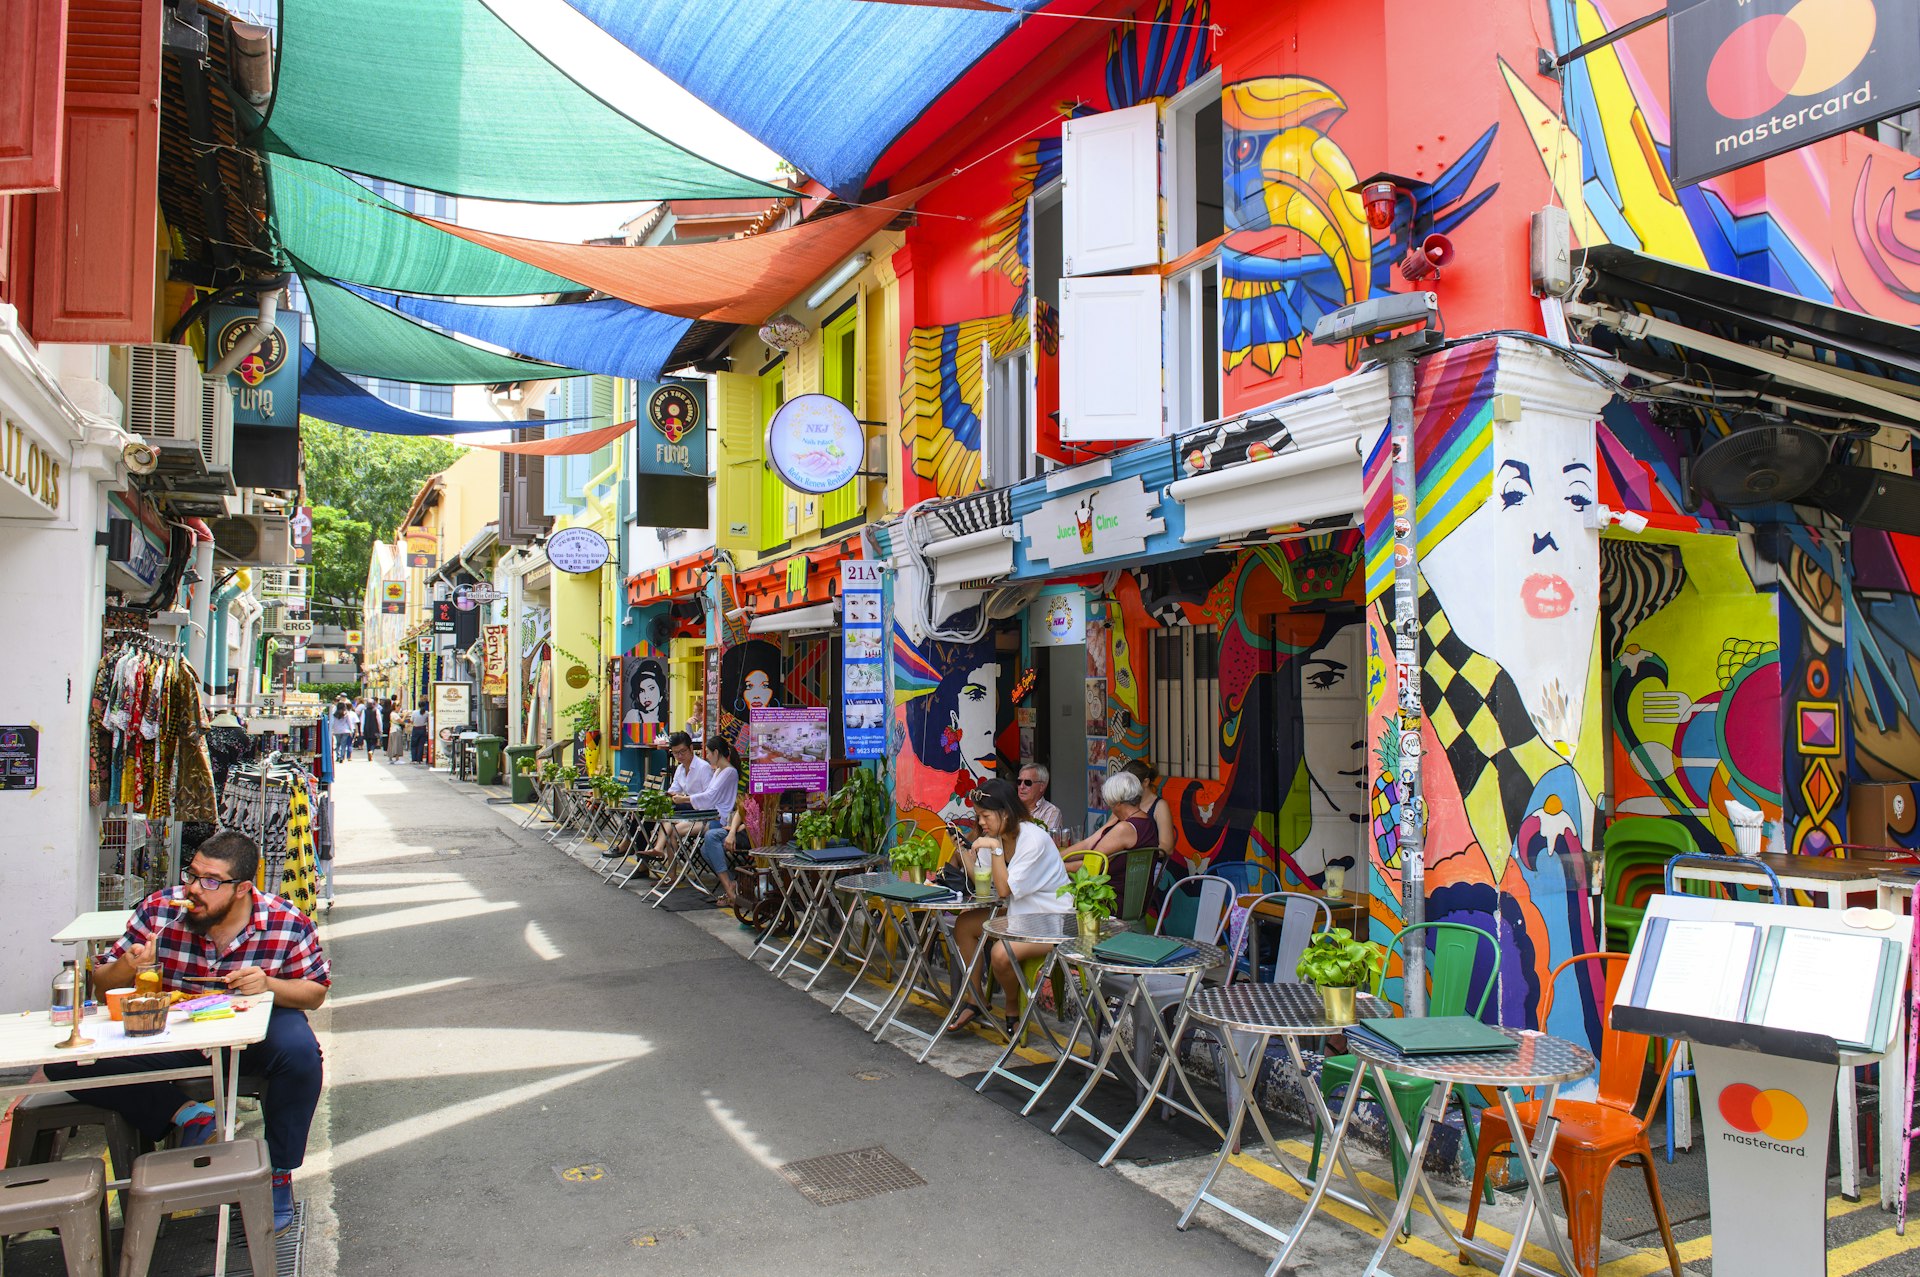 Haji Lane is the Kampong Glam quarter famous for its cafes, restaurants and shops